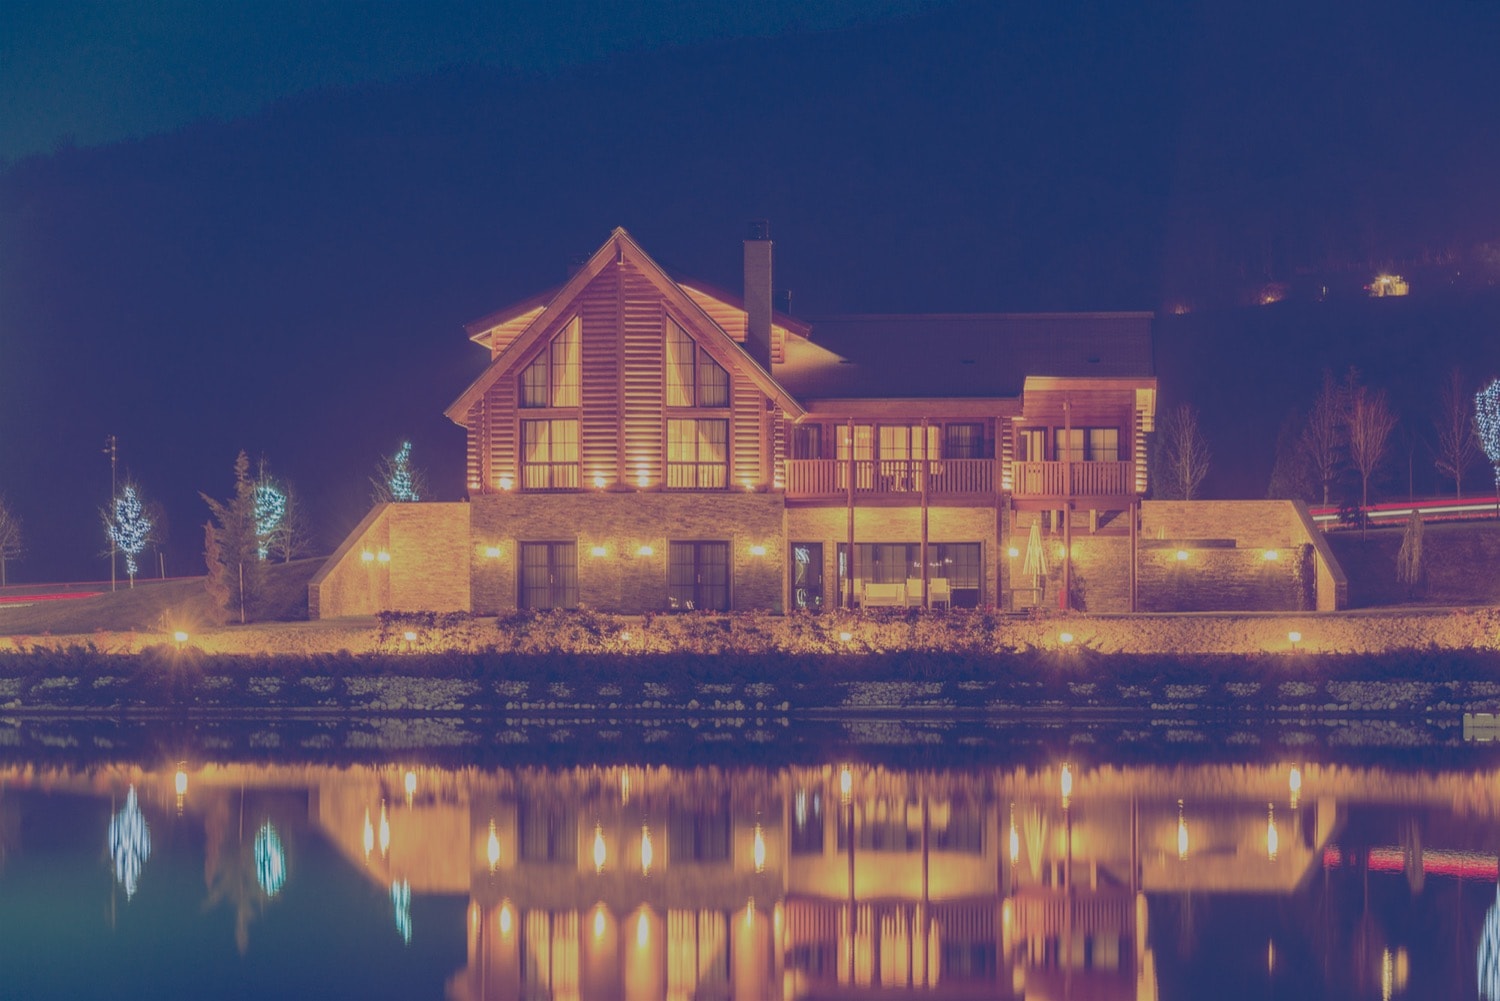 Large bed and breakfast home on a lake at night. 